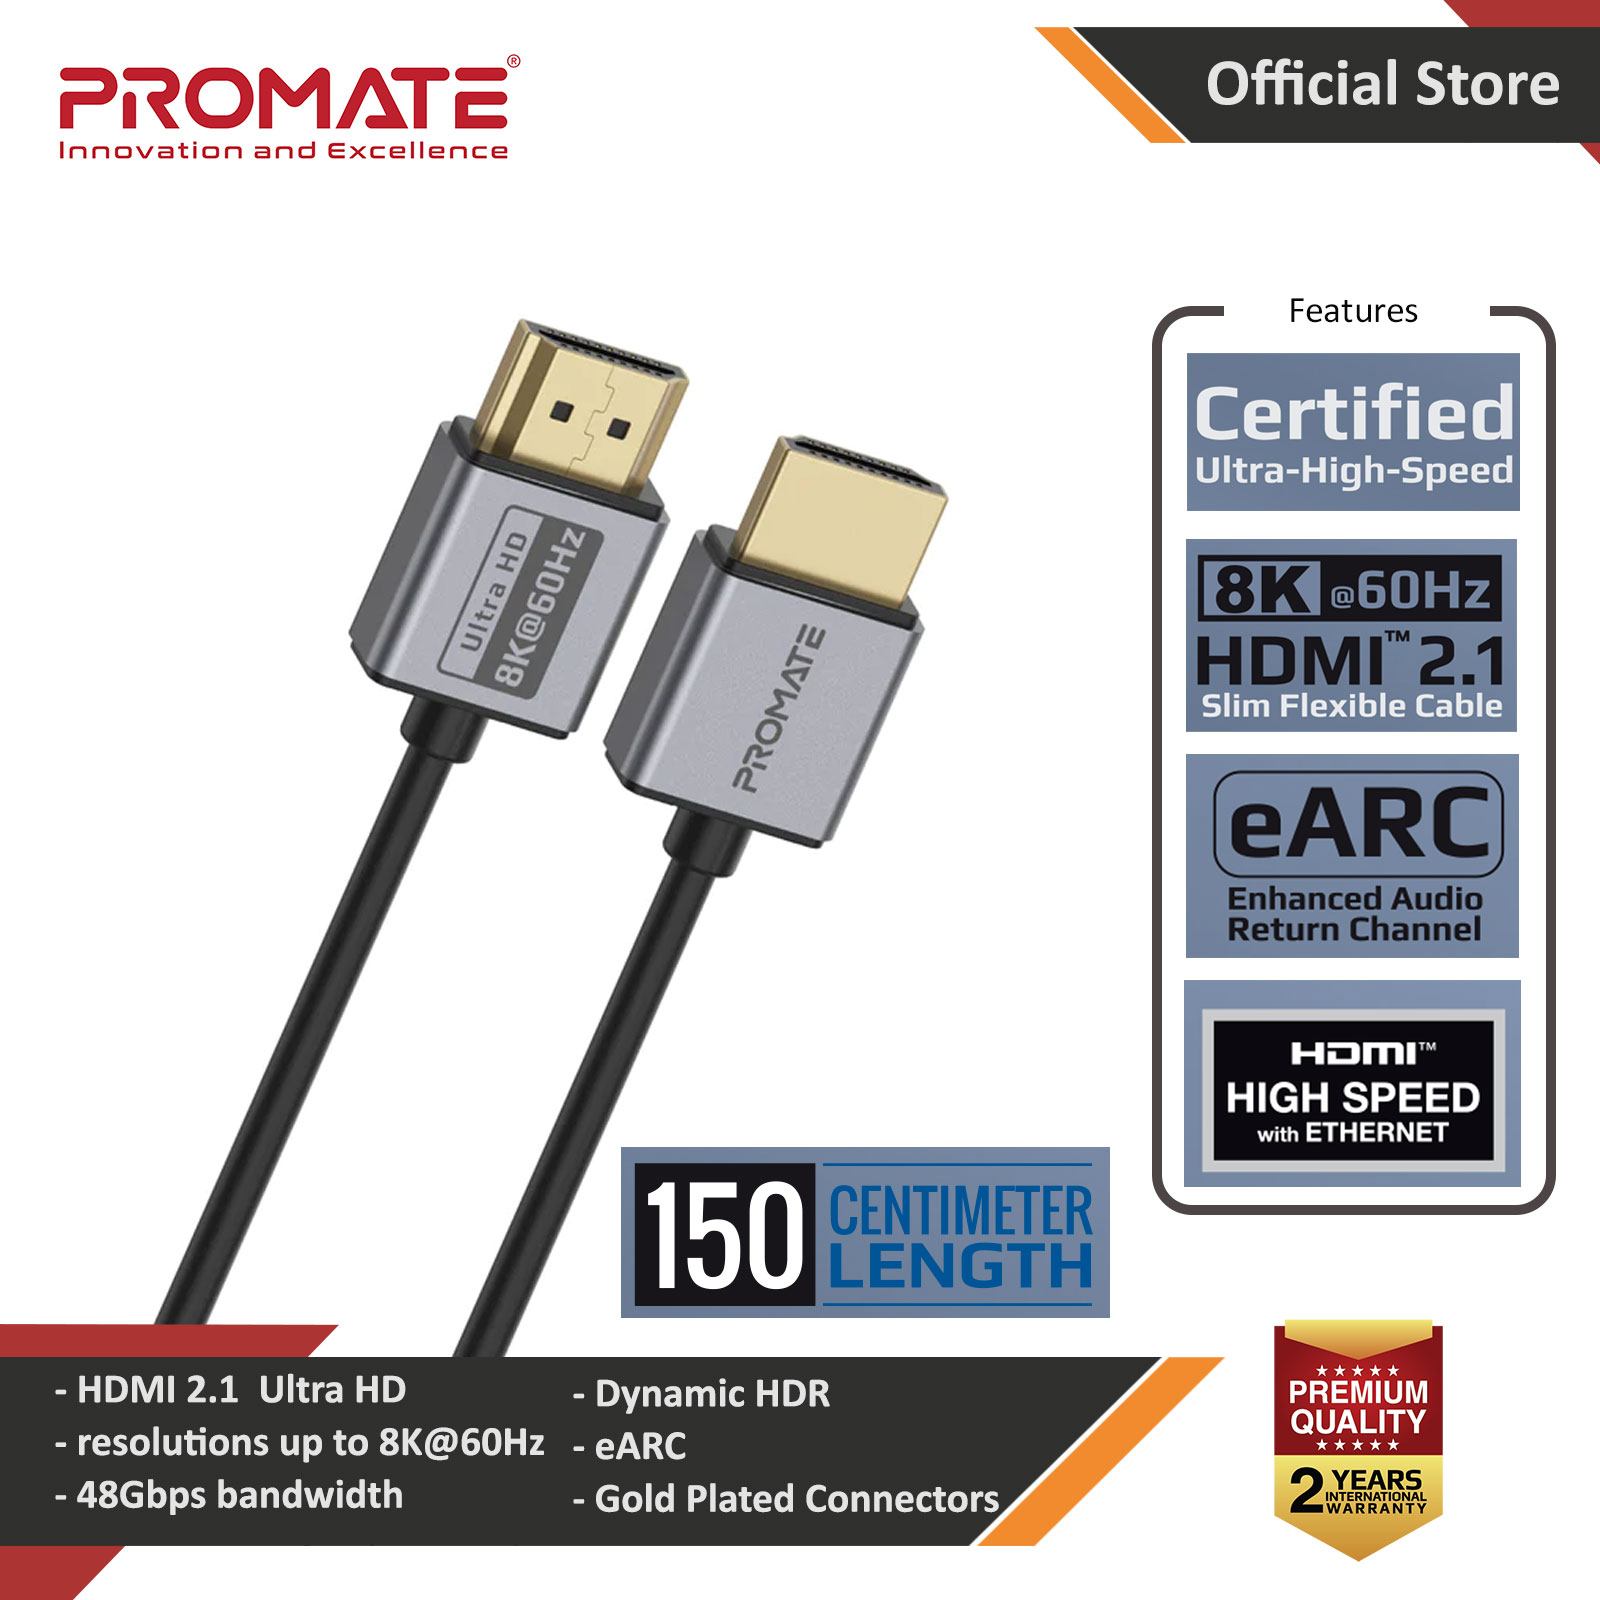 Picture of PROMATE Primelink8K-150 Gold Plate Ultra HD High Speed 8K HDMI 2.1 Ultra HD Audio Video Cable HDR Colour Support eARC Connectivity Dolby Vision 1.5 meter Plug and Play150cm Cable Length Red Design- Red Design Cases, Red Design Covers, iPad Cases and a wide selection of Red Design Accessories in Malaysia, Sabah, Sarawak and Singapore 